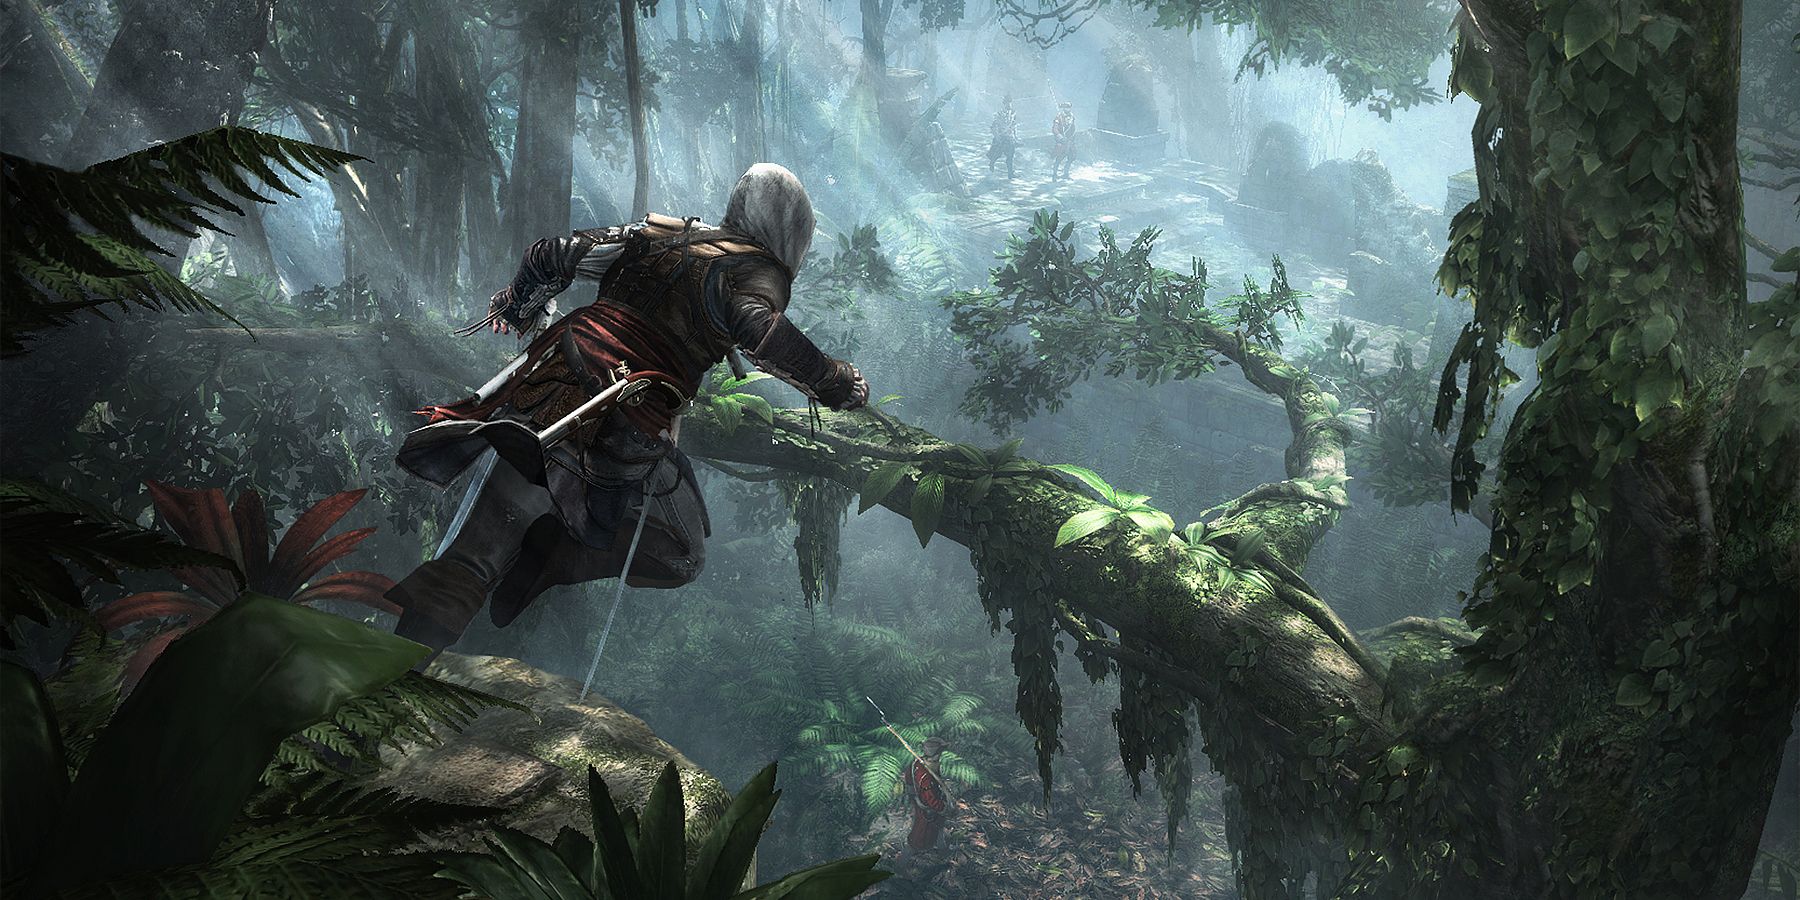 Edward Kenway tree parquor in Assassin's Creed 4 Black Flag